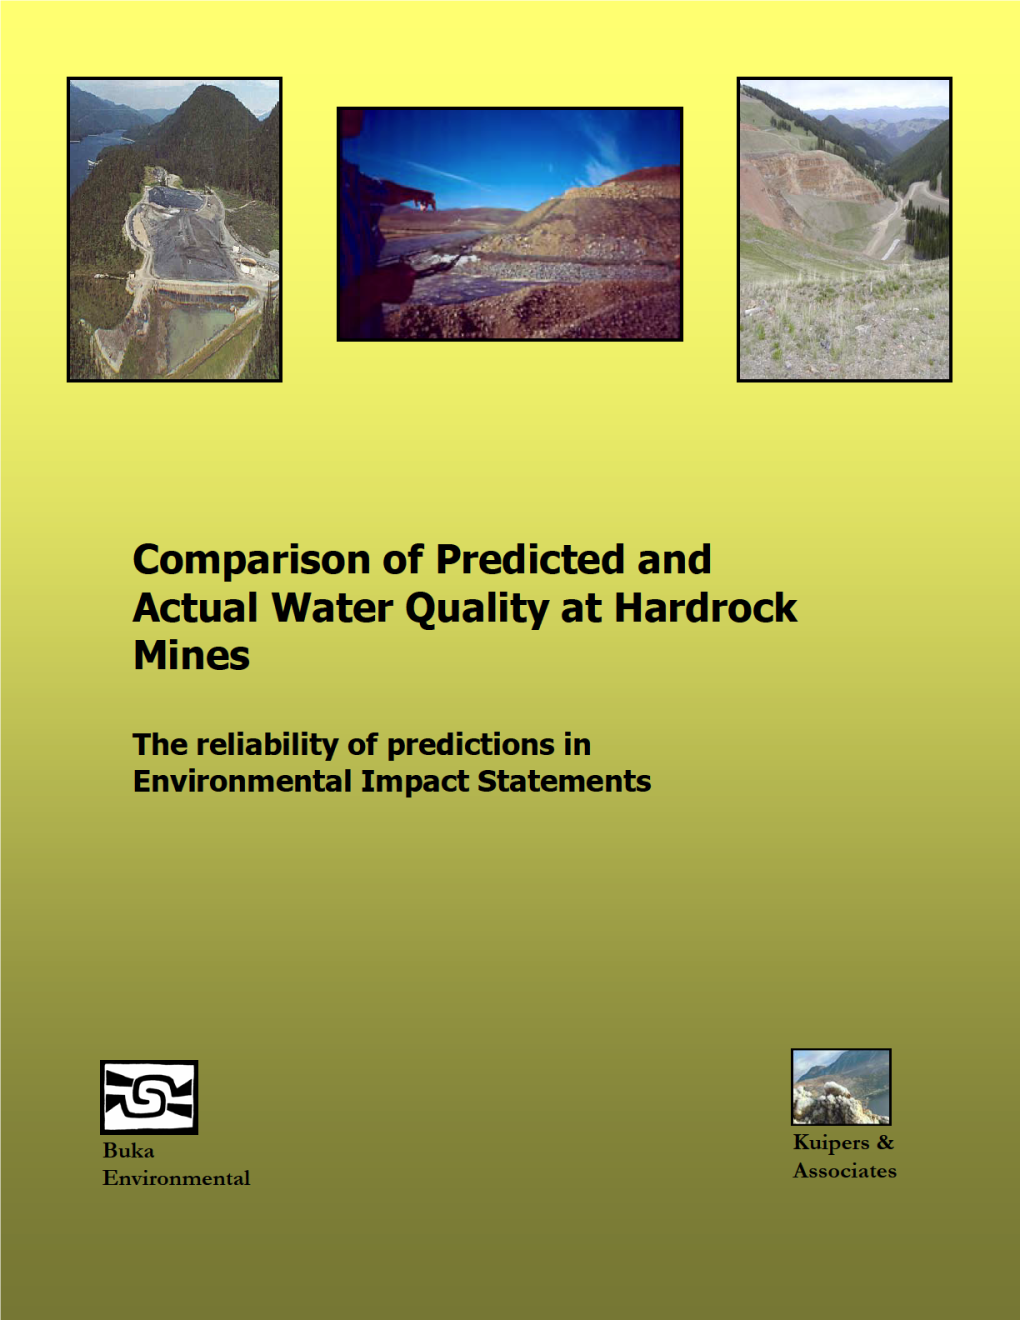 Comparison of Predicted and Actual Water Quality at Hardrock Mines